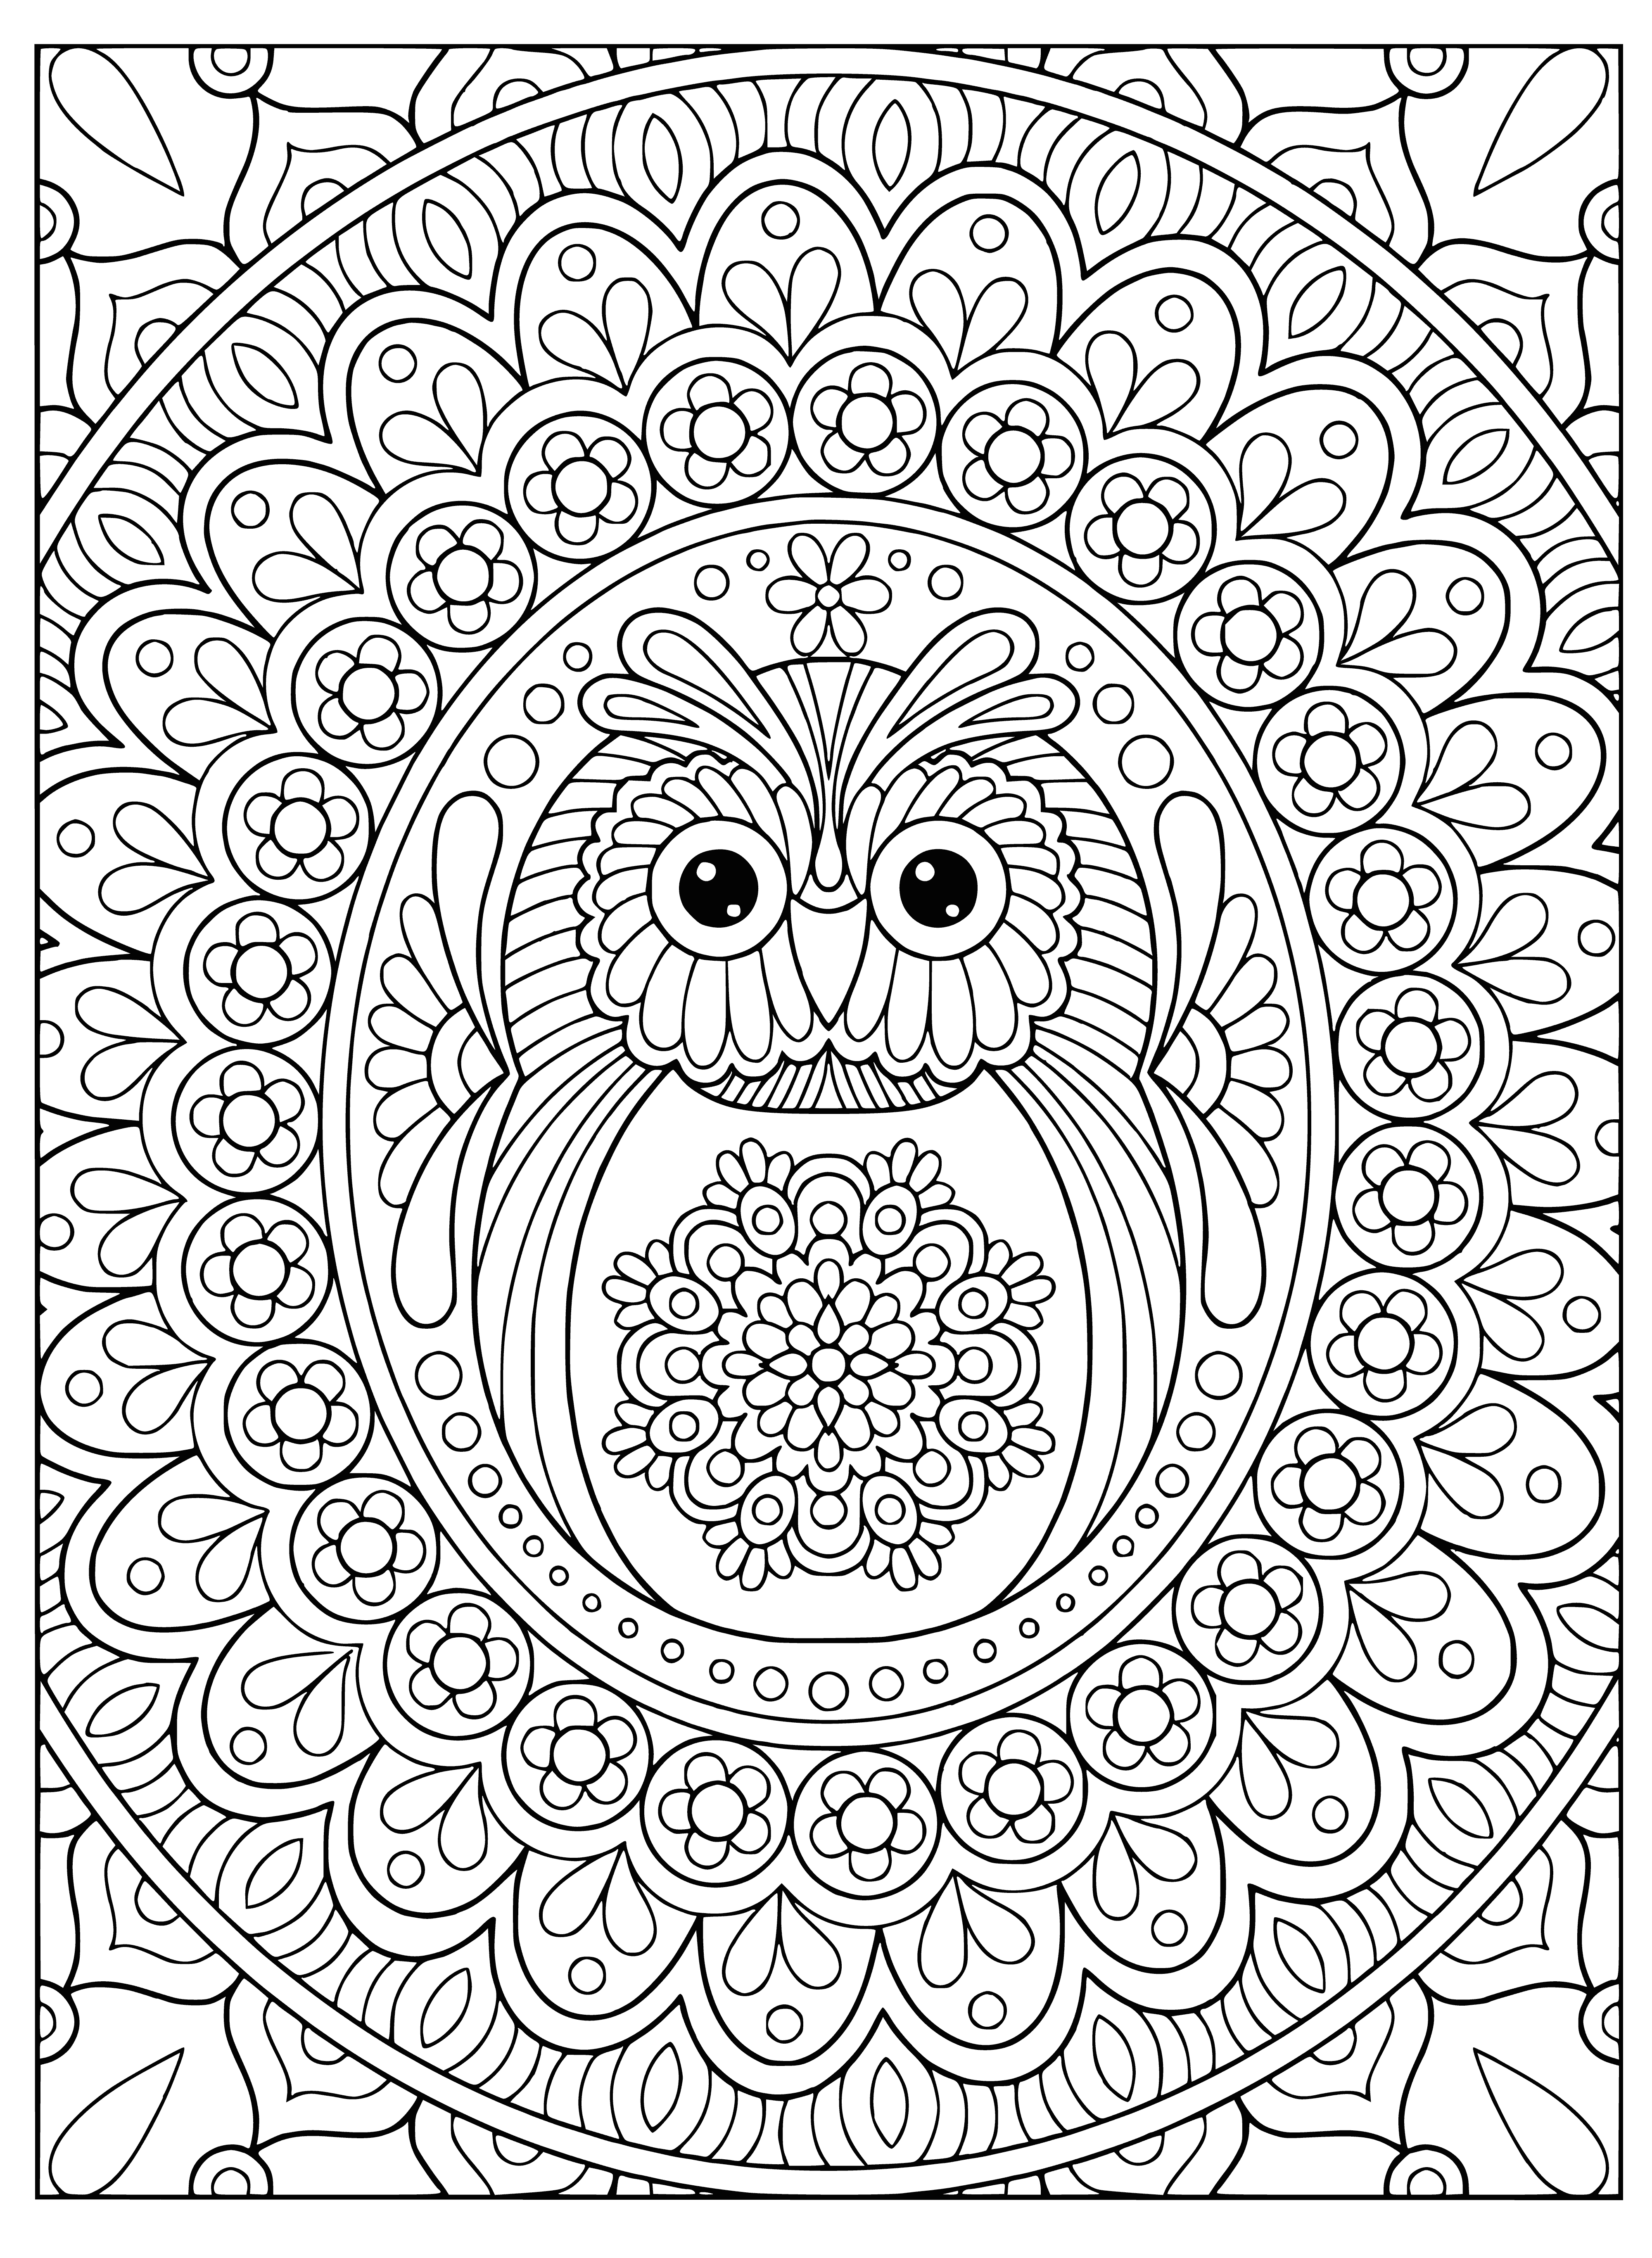 Owlet coloring page